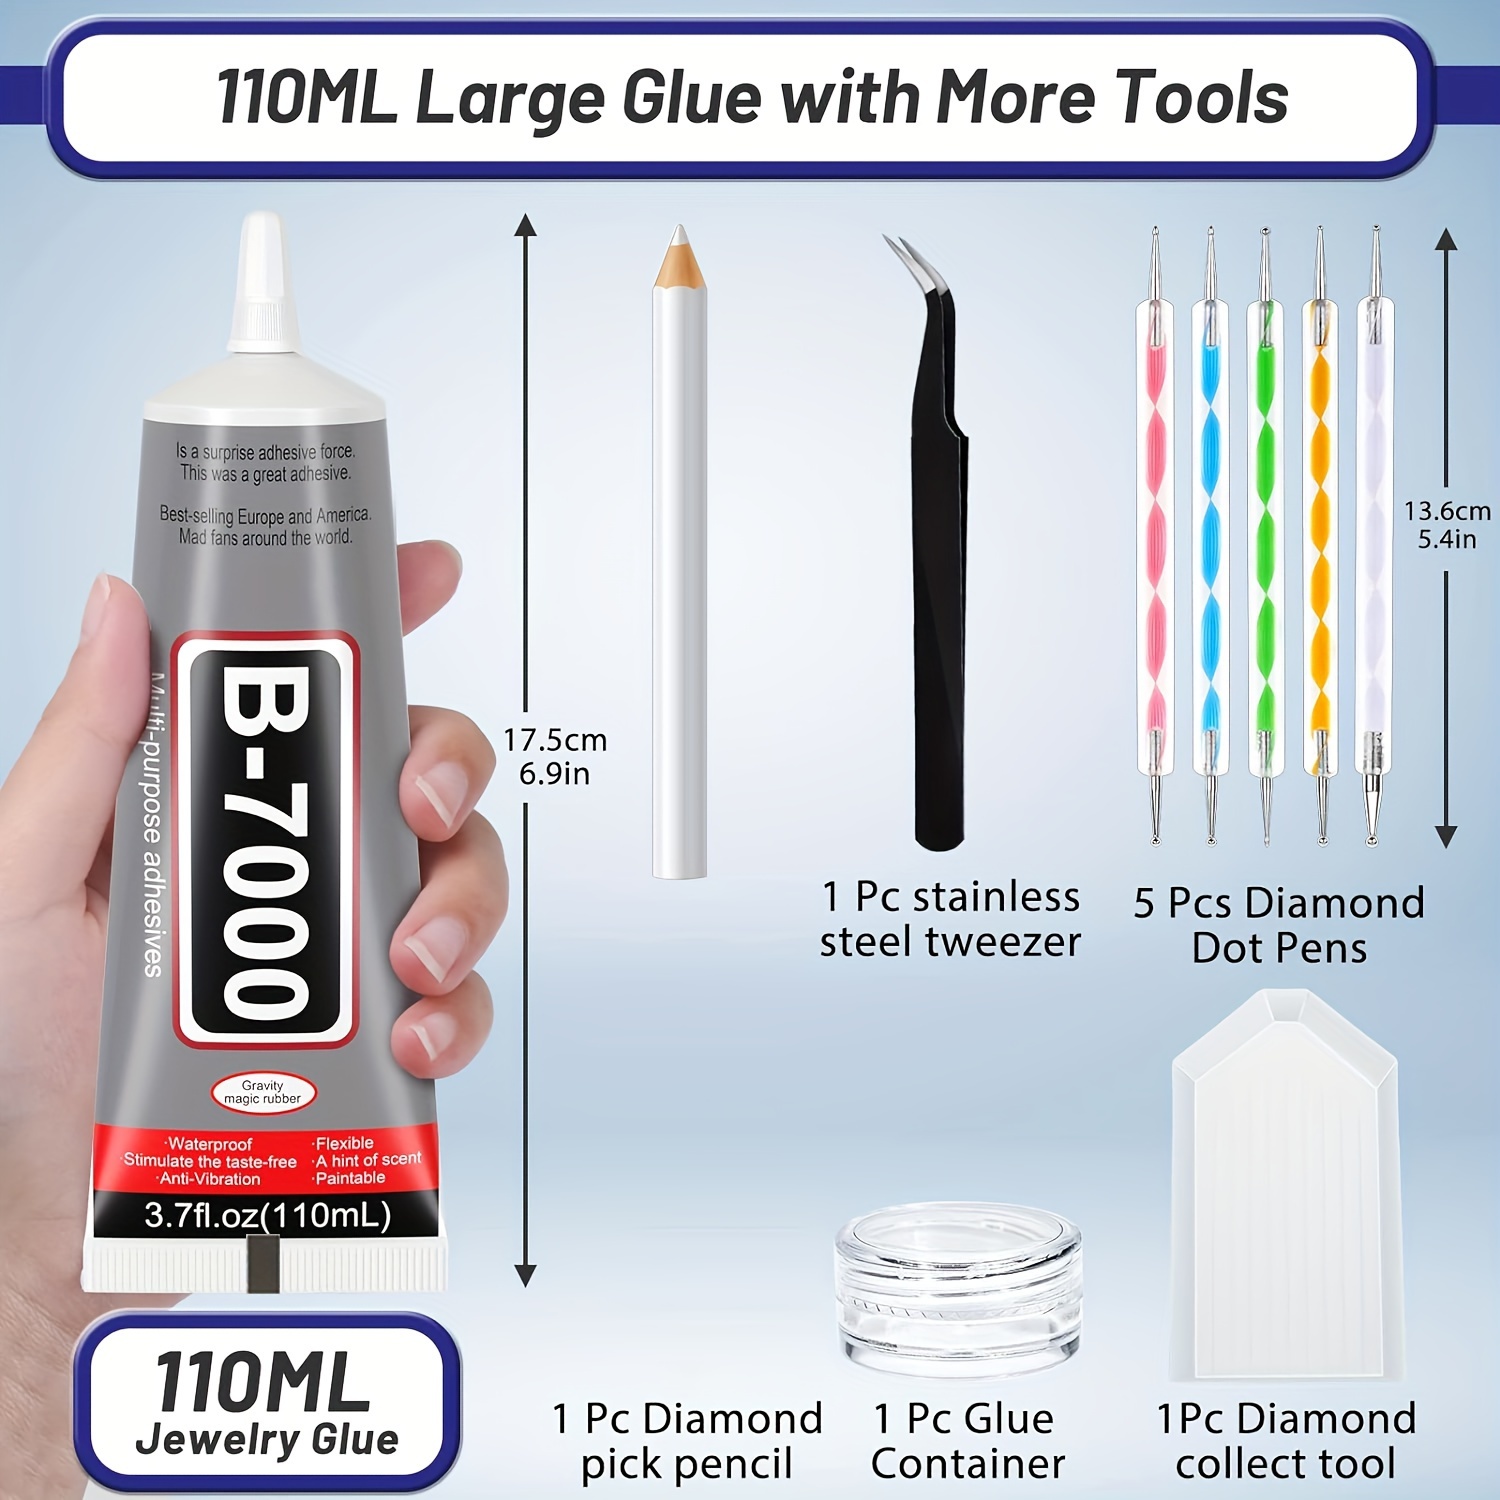 B 7000 Fabric Glue with Precision Tips, Upgrade Industrial Strength  Adhesive B-7000 Glue Clear for Jewelry Crafts DIY, Metal, Stone, Rhinestone  Gems